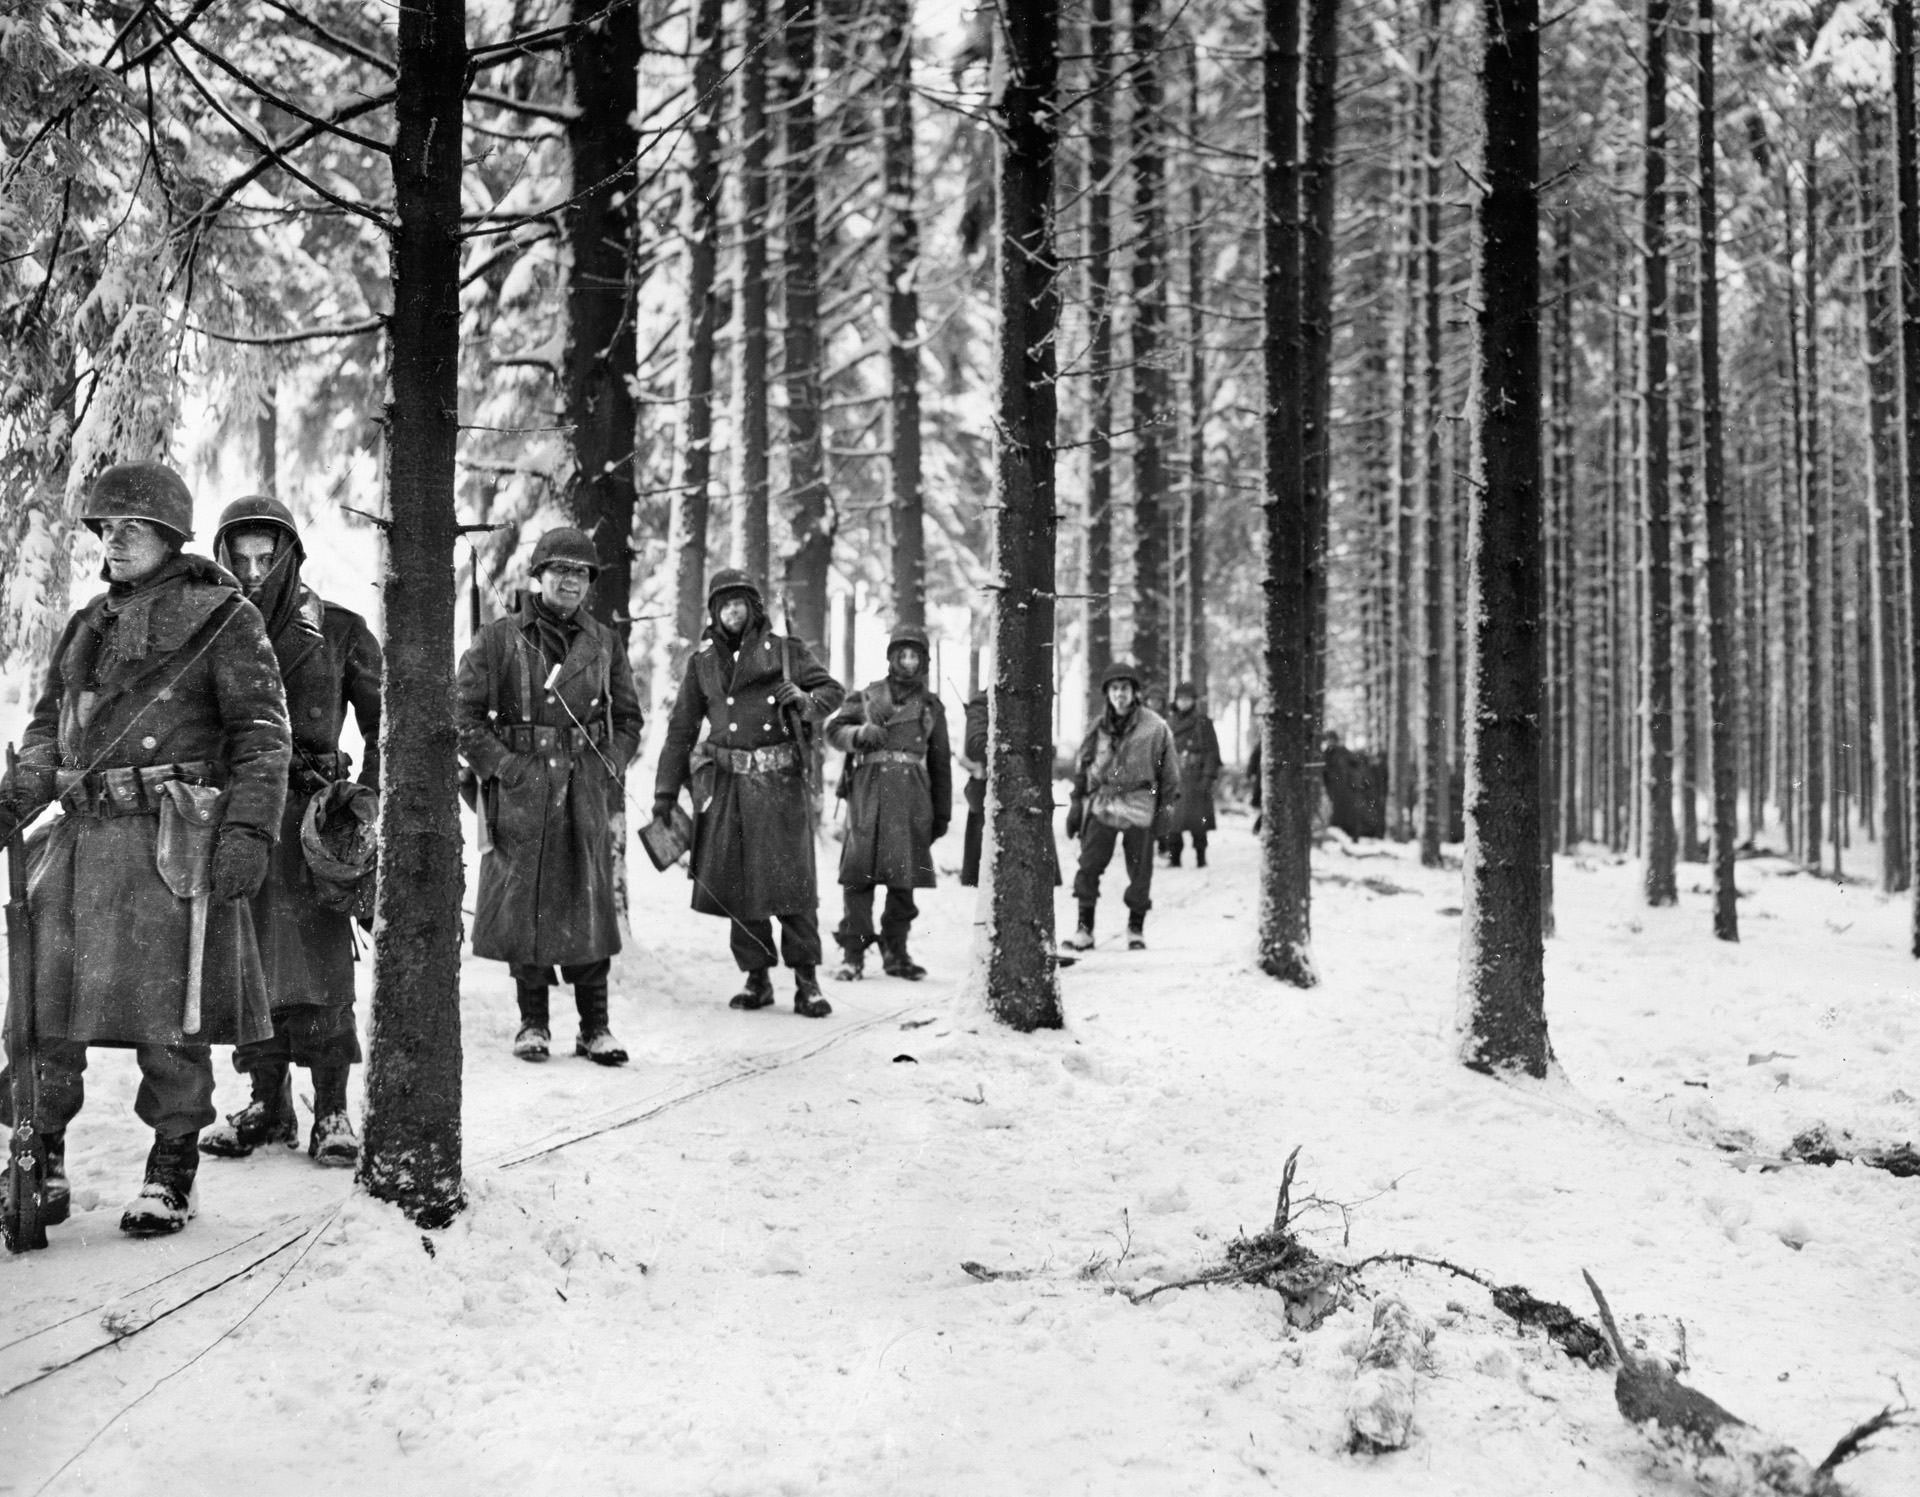 Soldiers of the 290th Infantry Regiment, 75th Infantry Division march through a Belgian woods during the Battle of the Bulge. It was in a forest like this that Staff Sergeant Darrell Bush tried to carry a fellow scout off the battlefield until he took a bullet from Germans firing down from the trees.